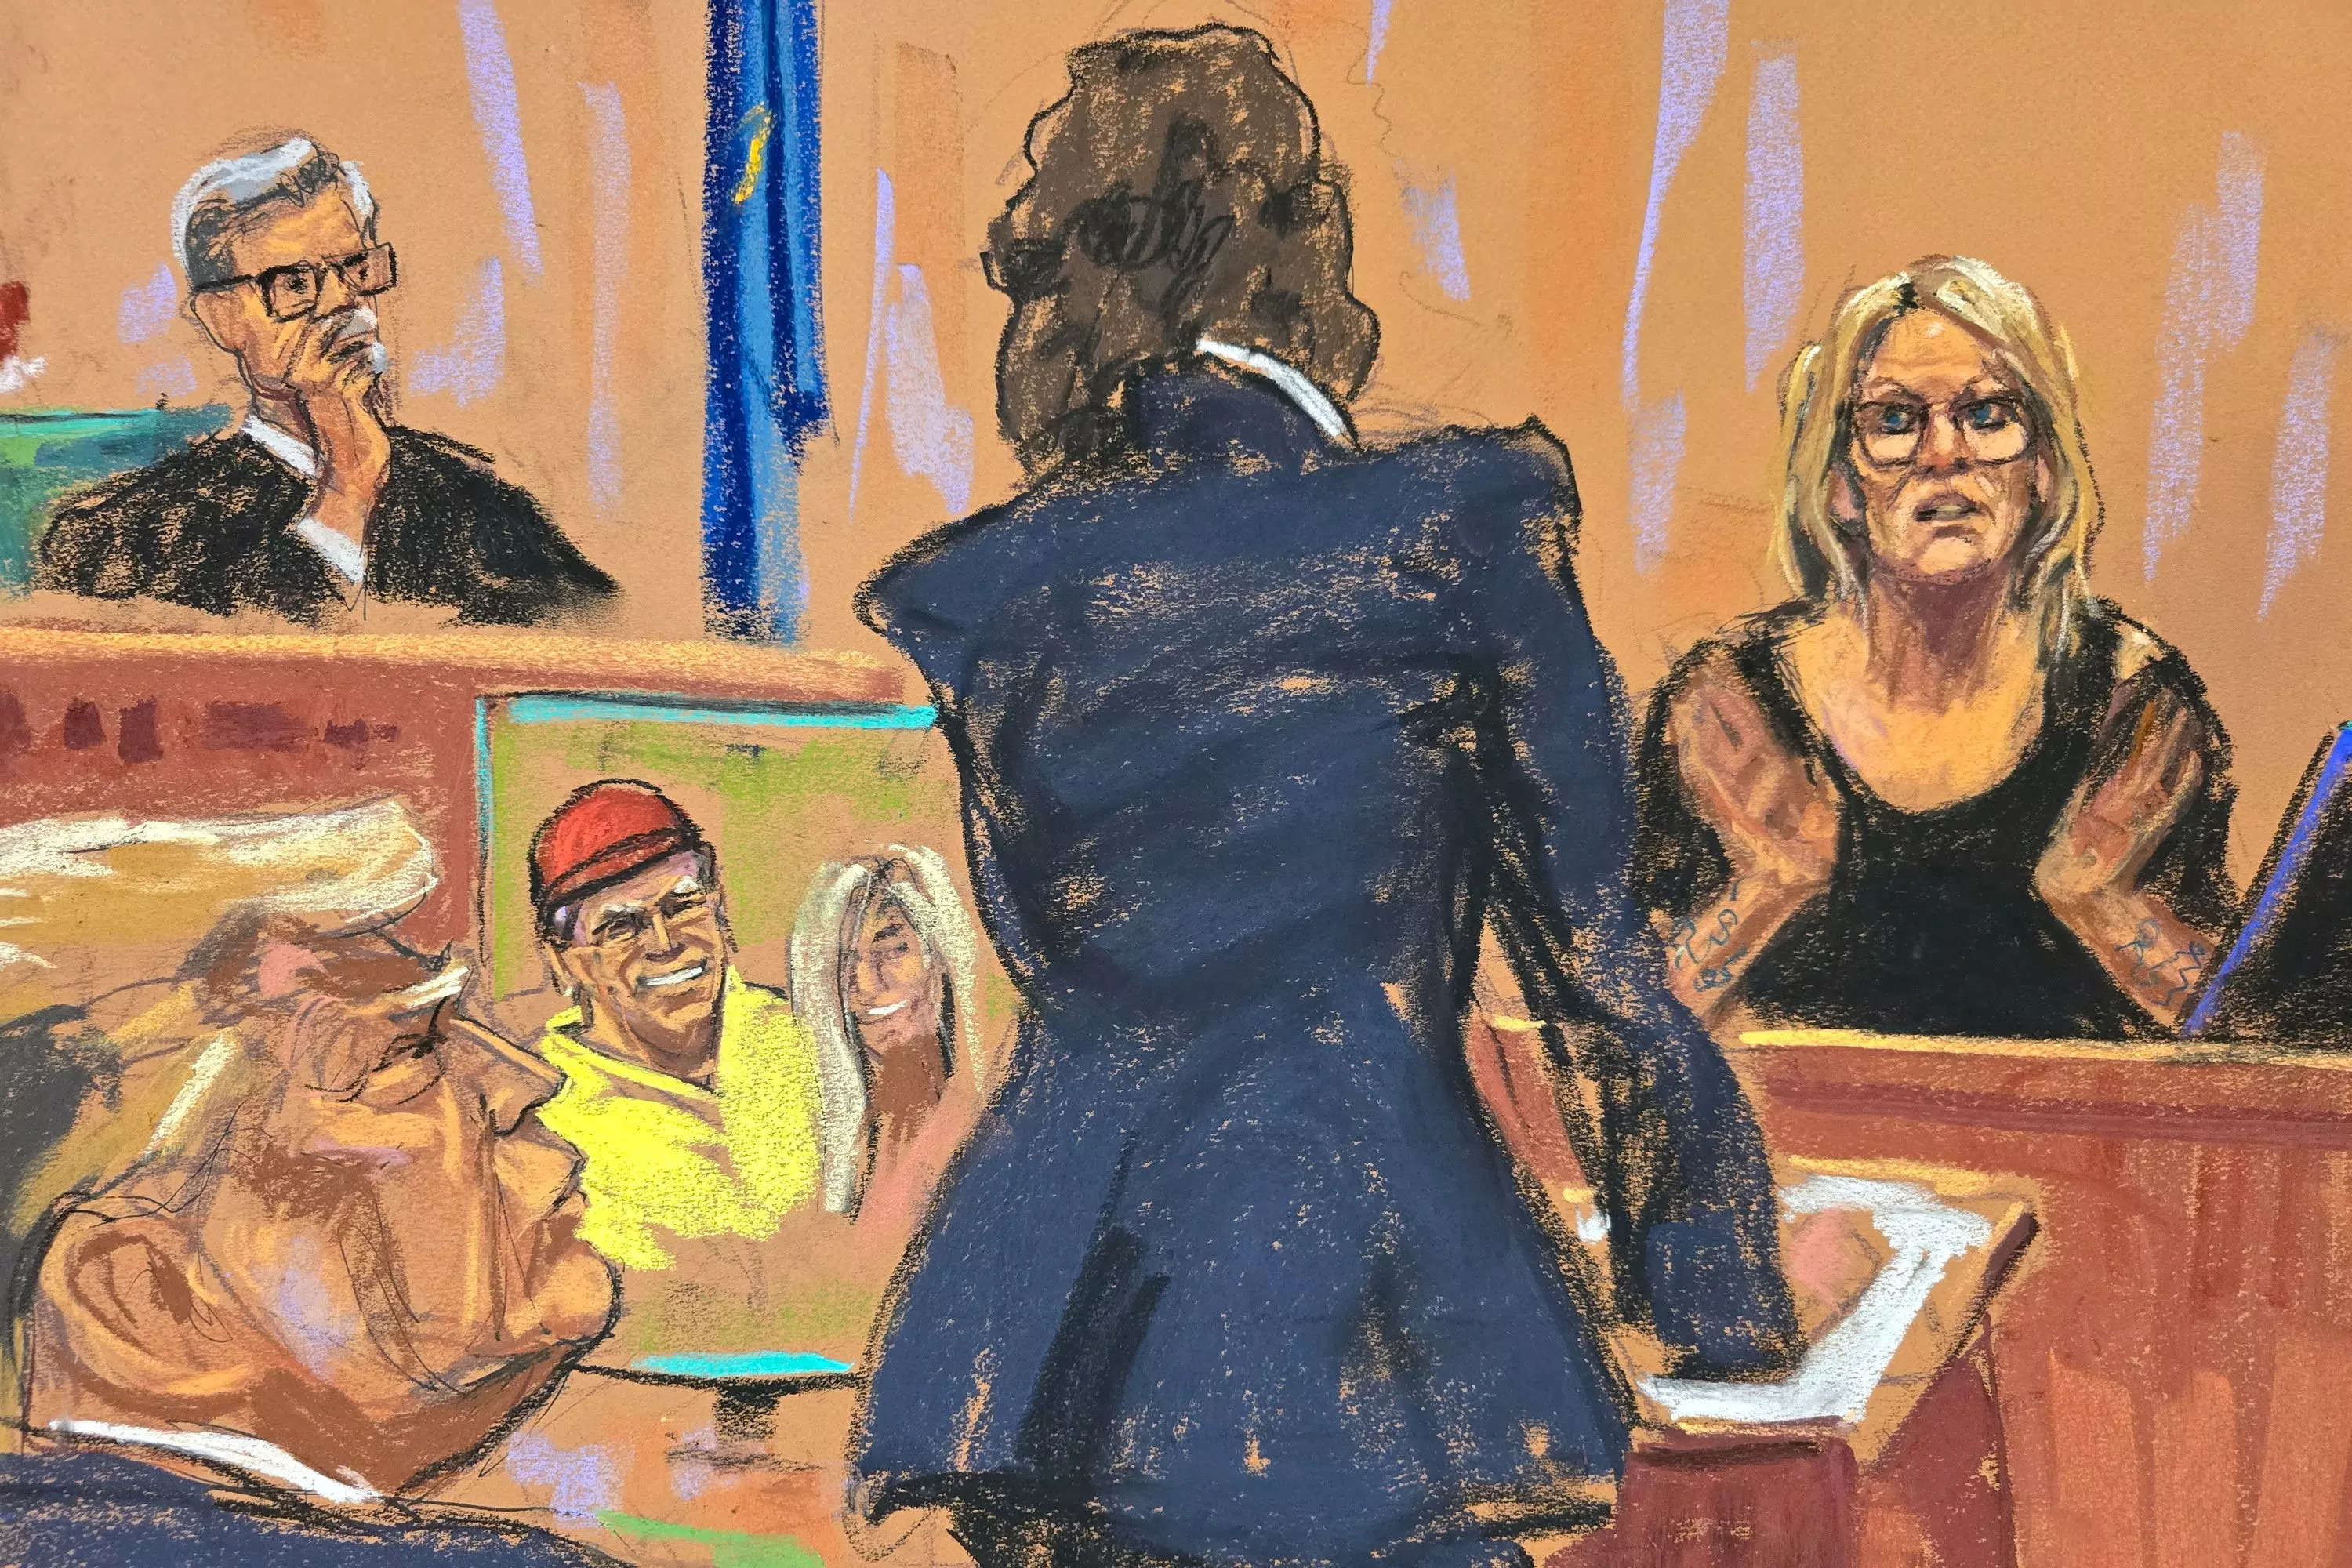 A courtroom sketch of Stormy Daniels being questioned by prosecutor Susan Hoffinger during former President Donald Trump